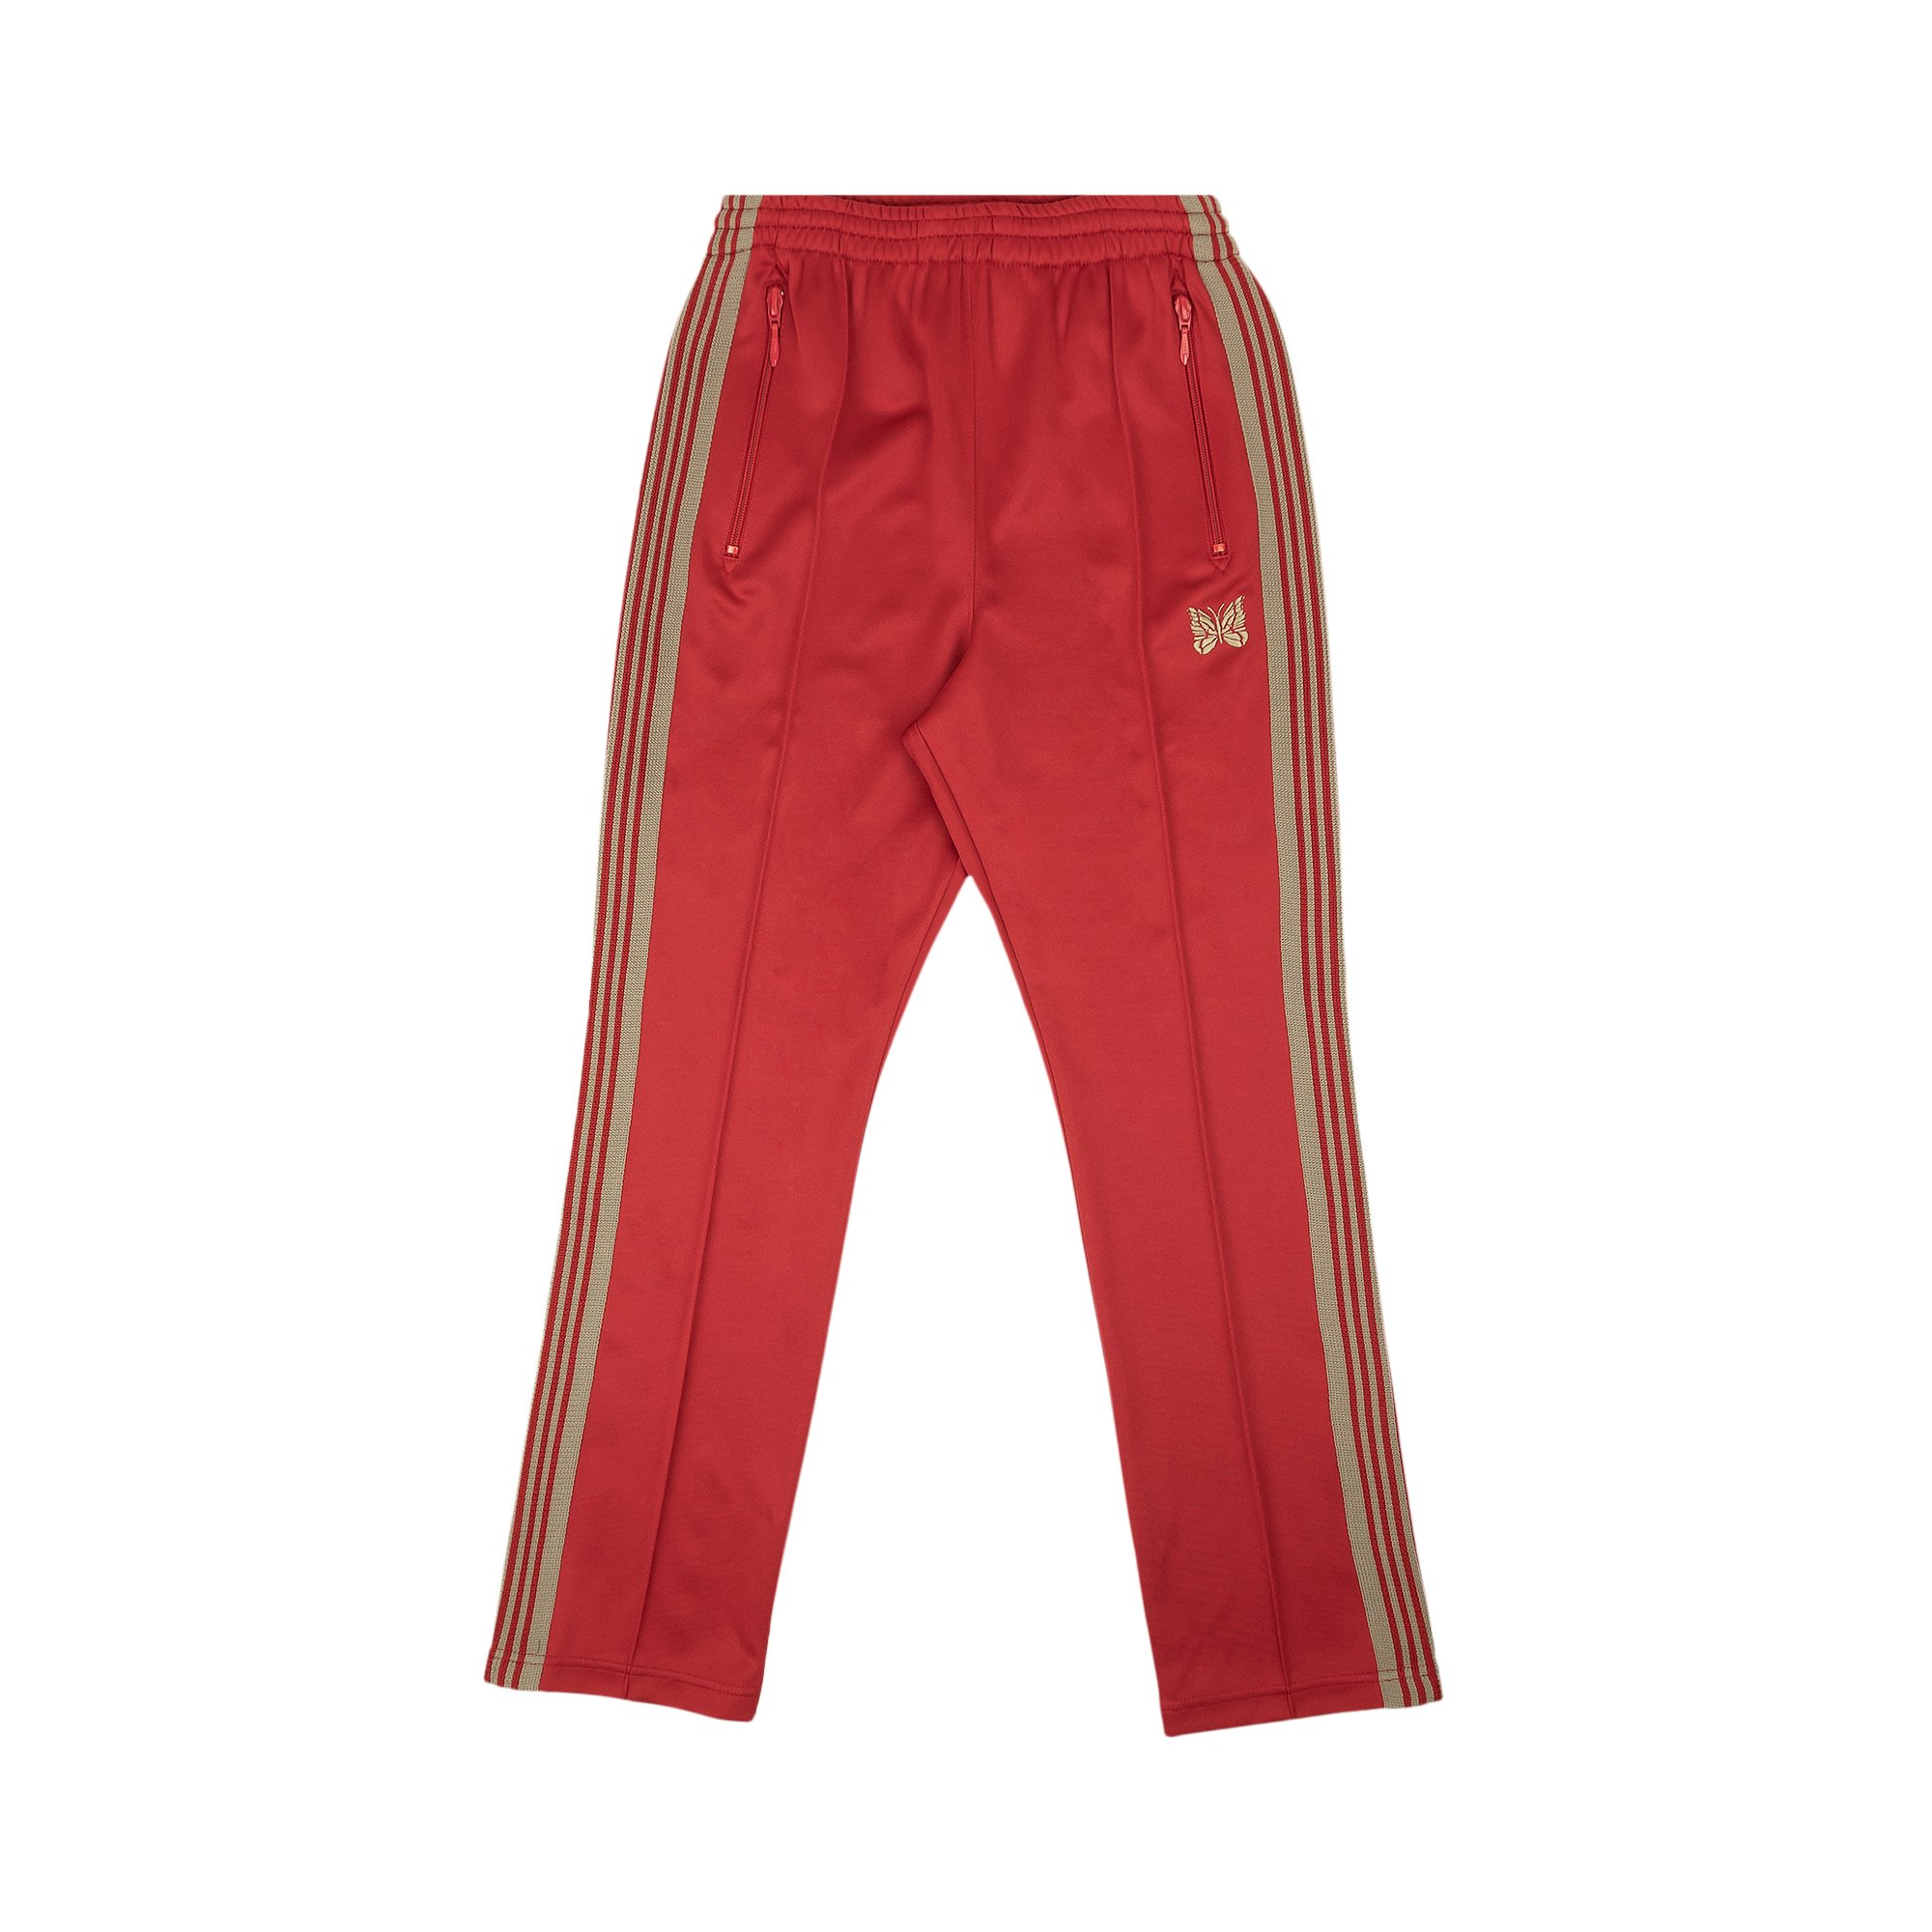 Buy Needles Narrow Smooth Track Pants 'Red' - KP221C RED | GOAT CA